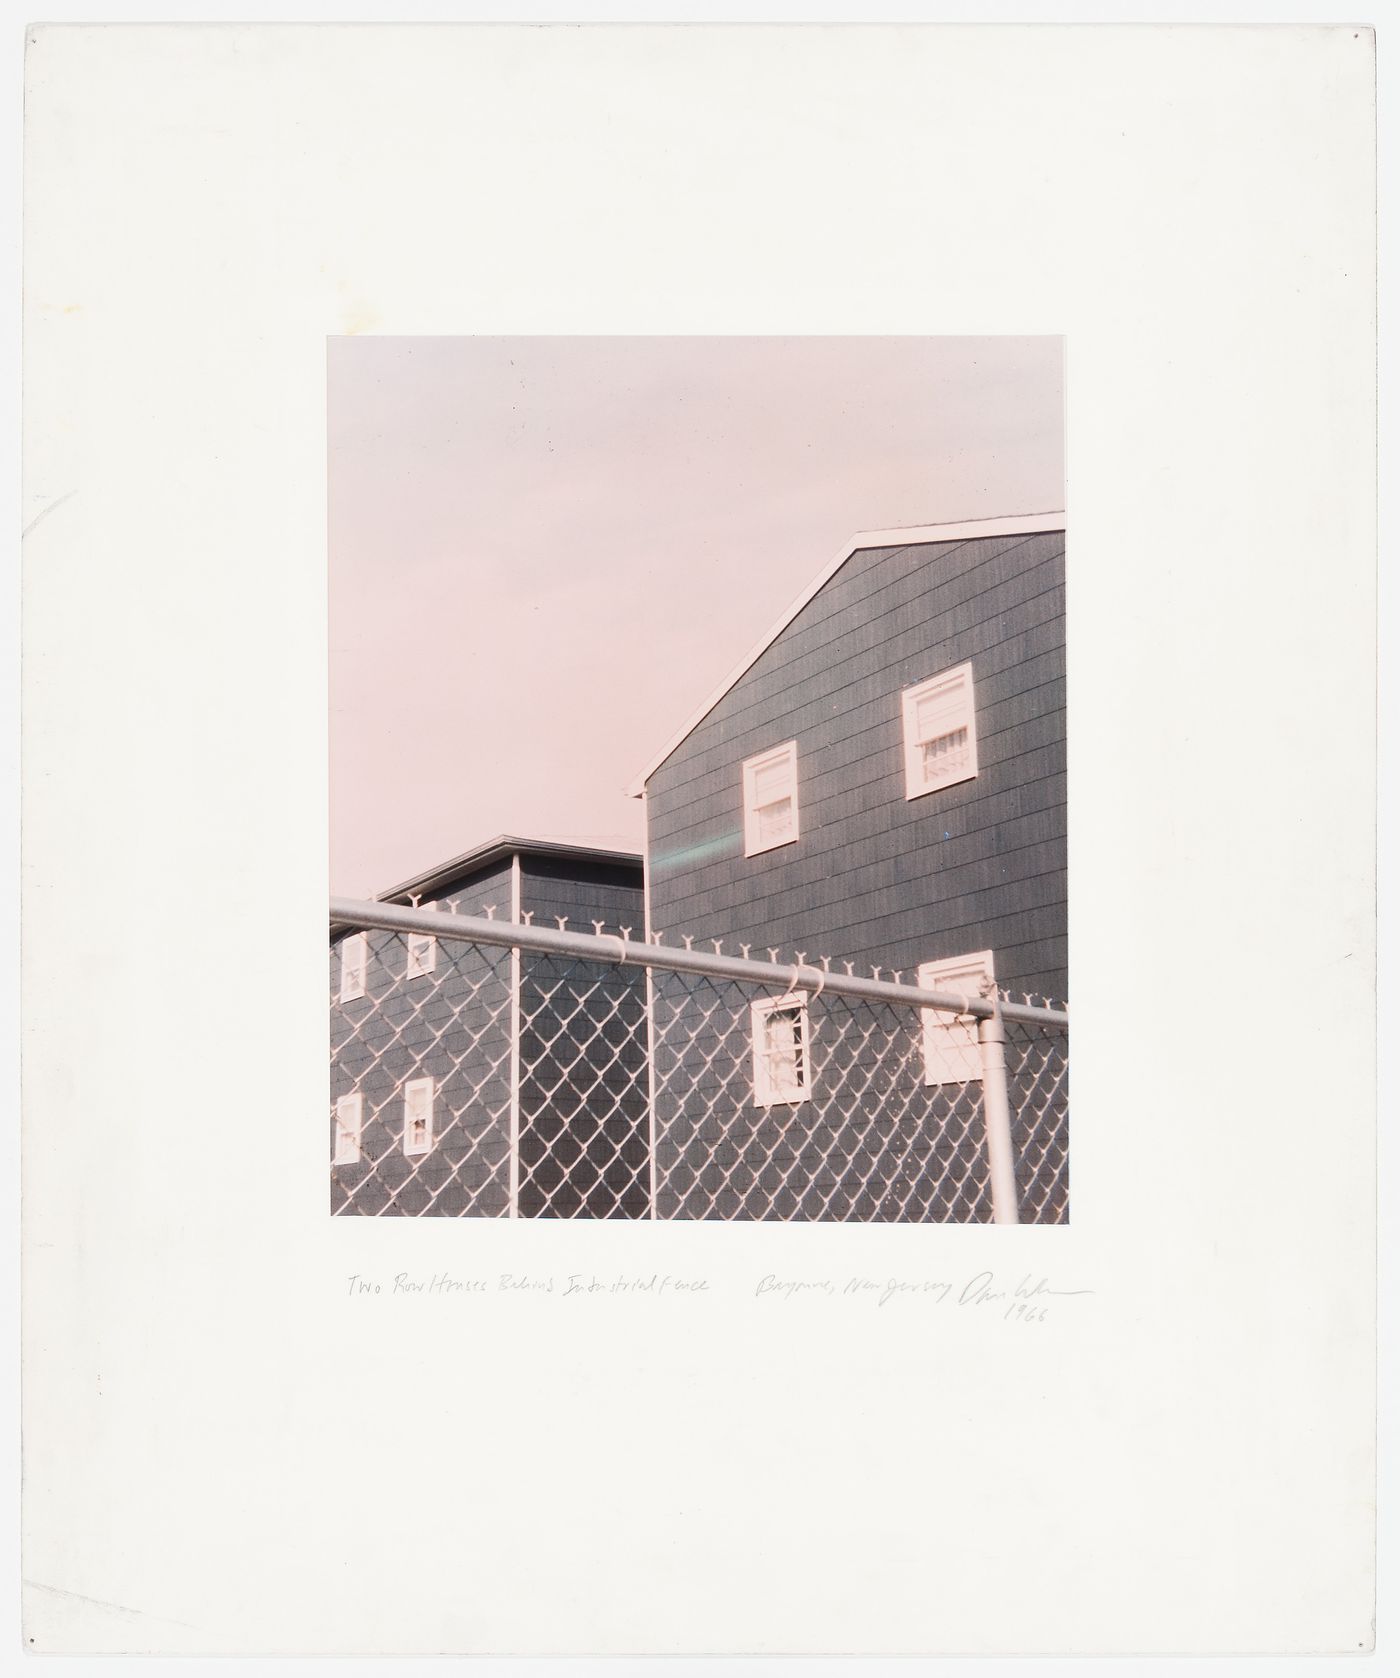 "Two Row Houses Behind Industrial Fence, Bayonne, New Jersey", United States, from the series "Homes for America"